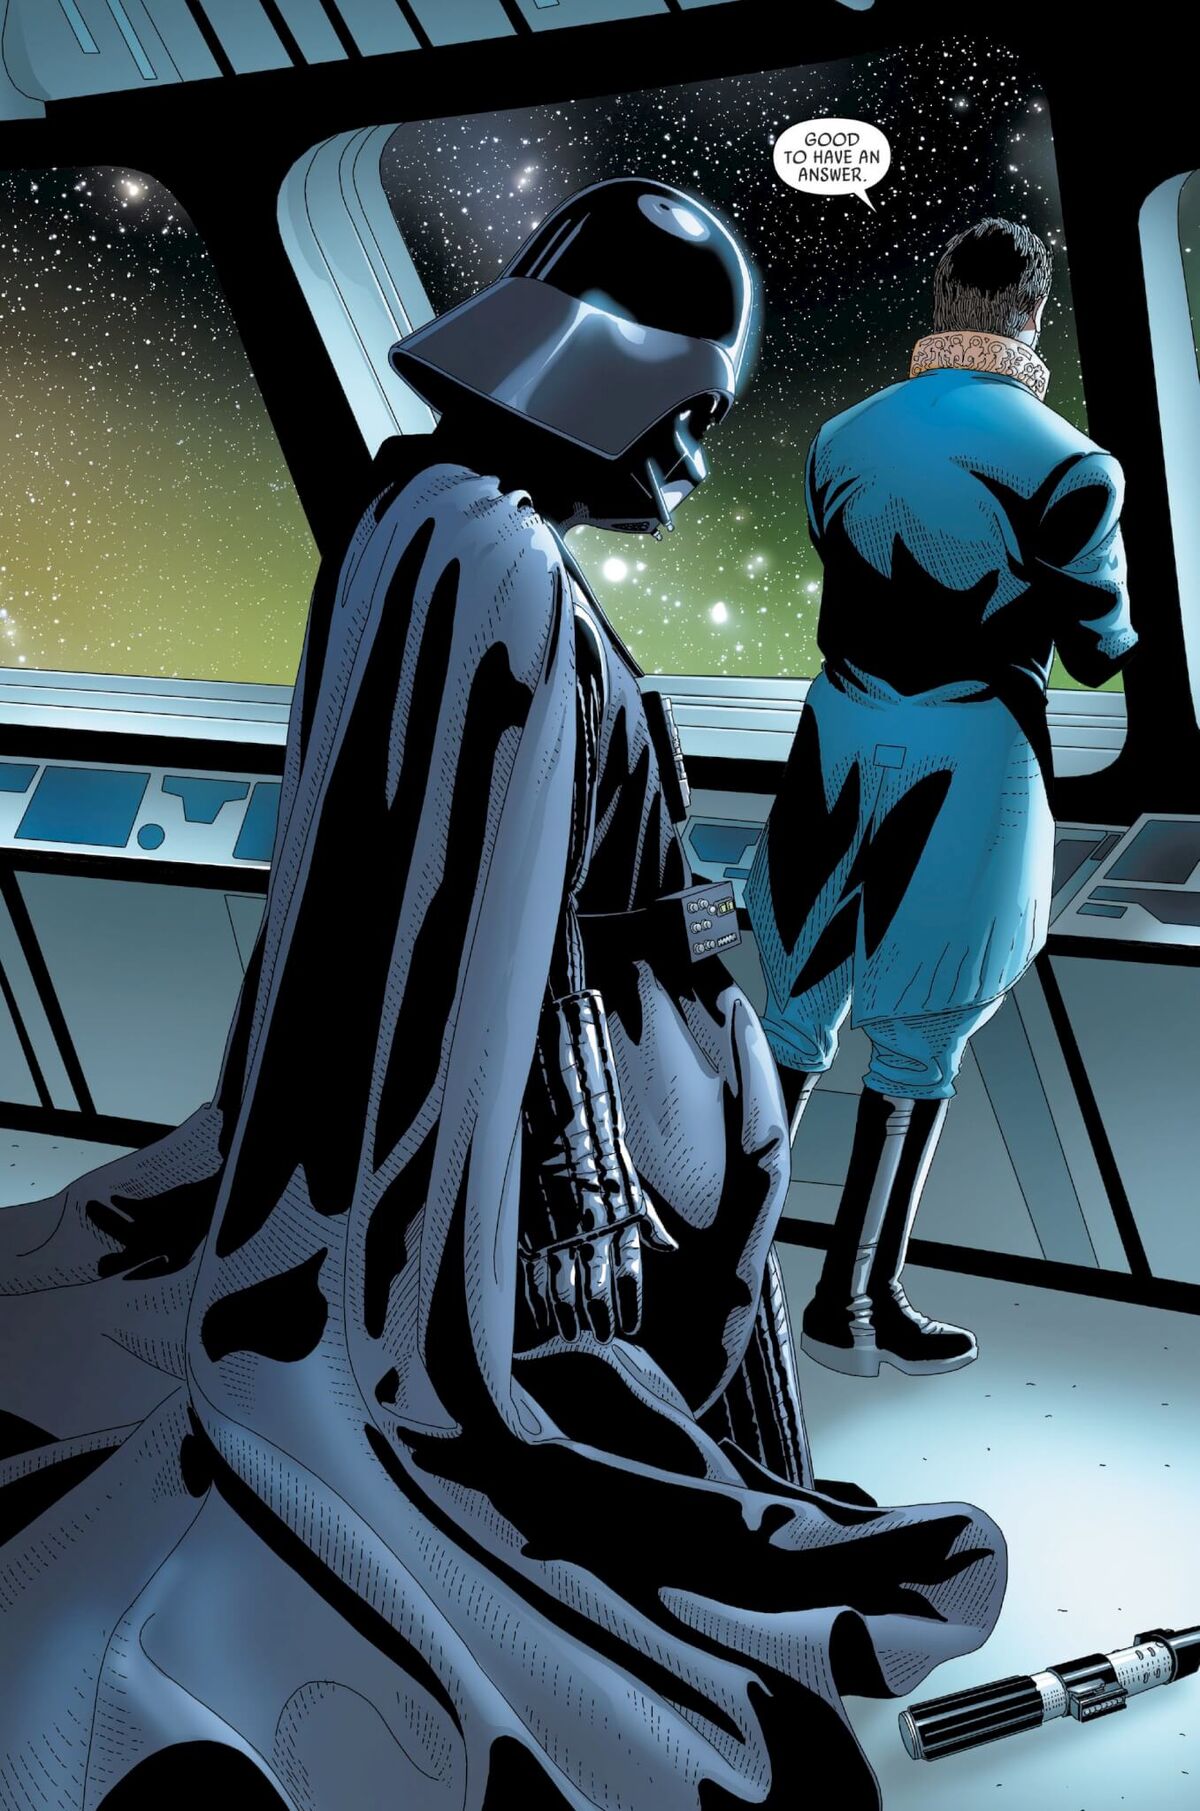 Panel from Darth Vader, Issue 23 featuring Vader and Cylo-V